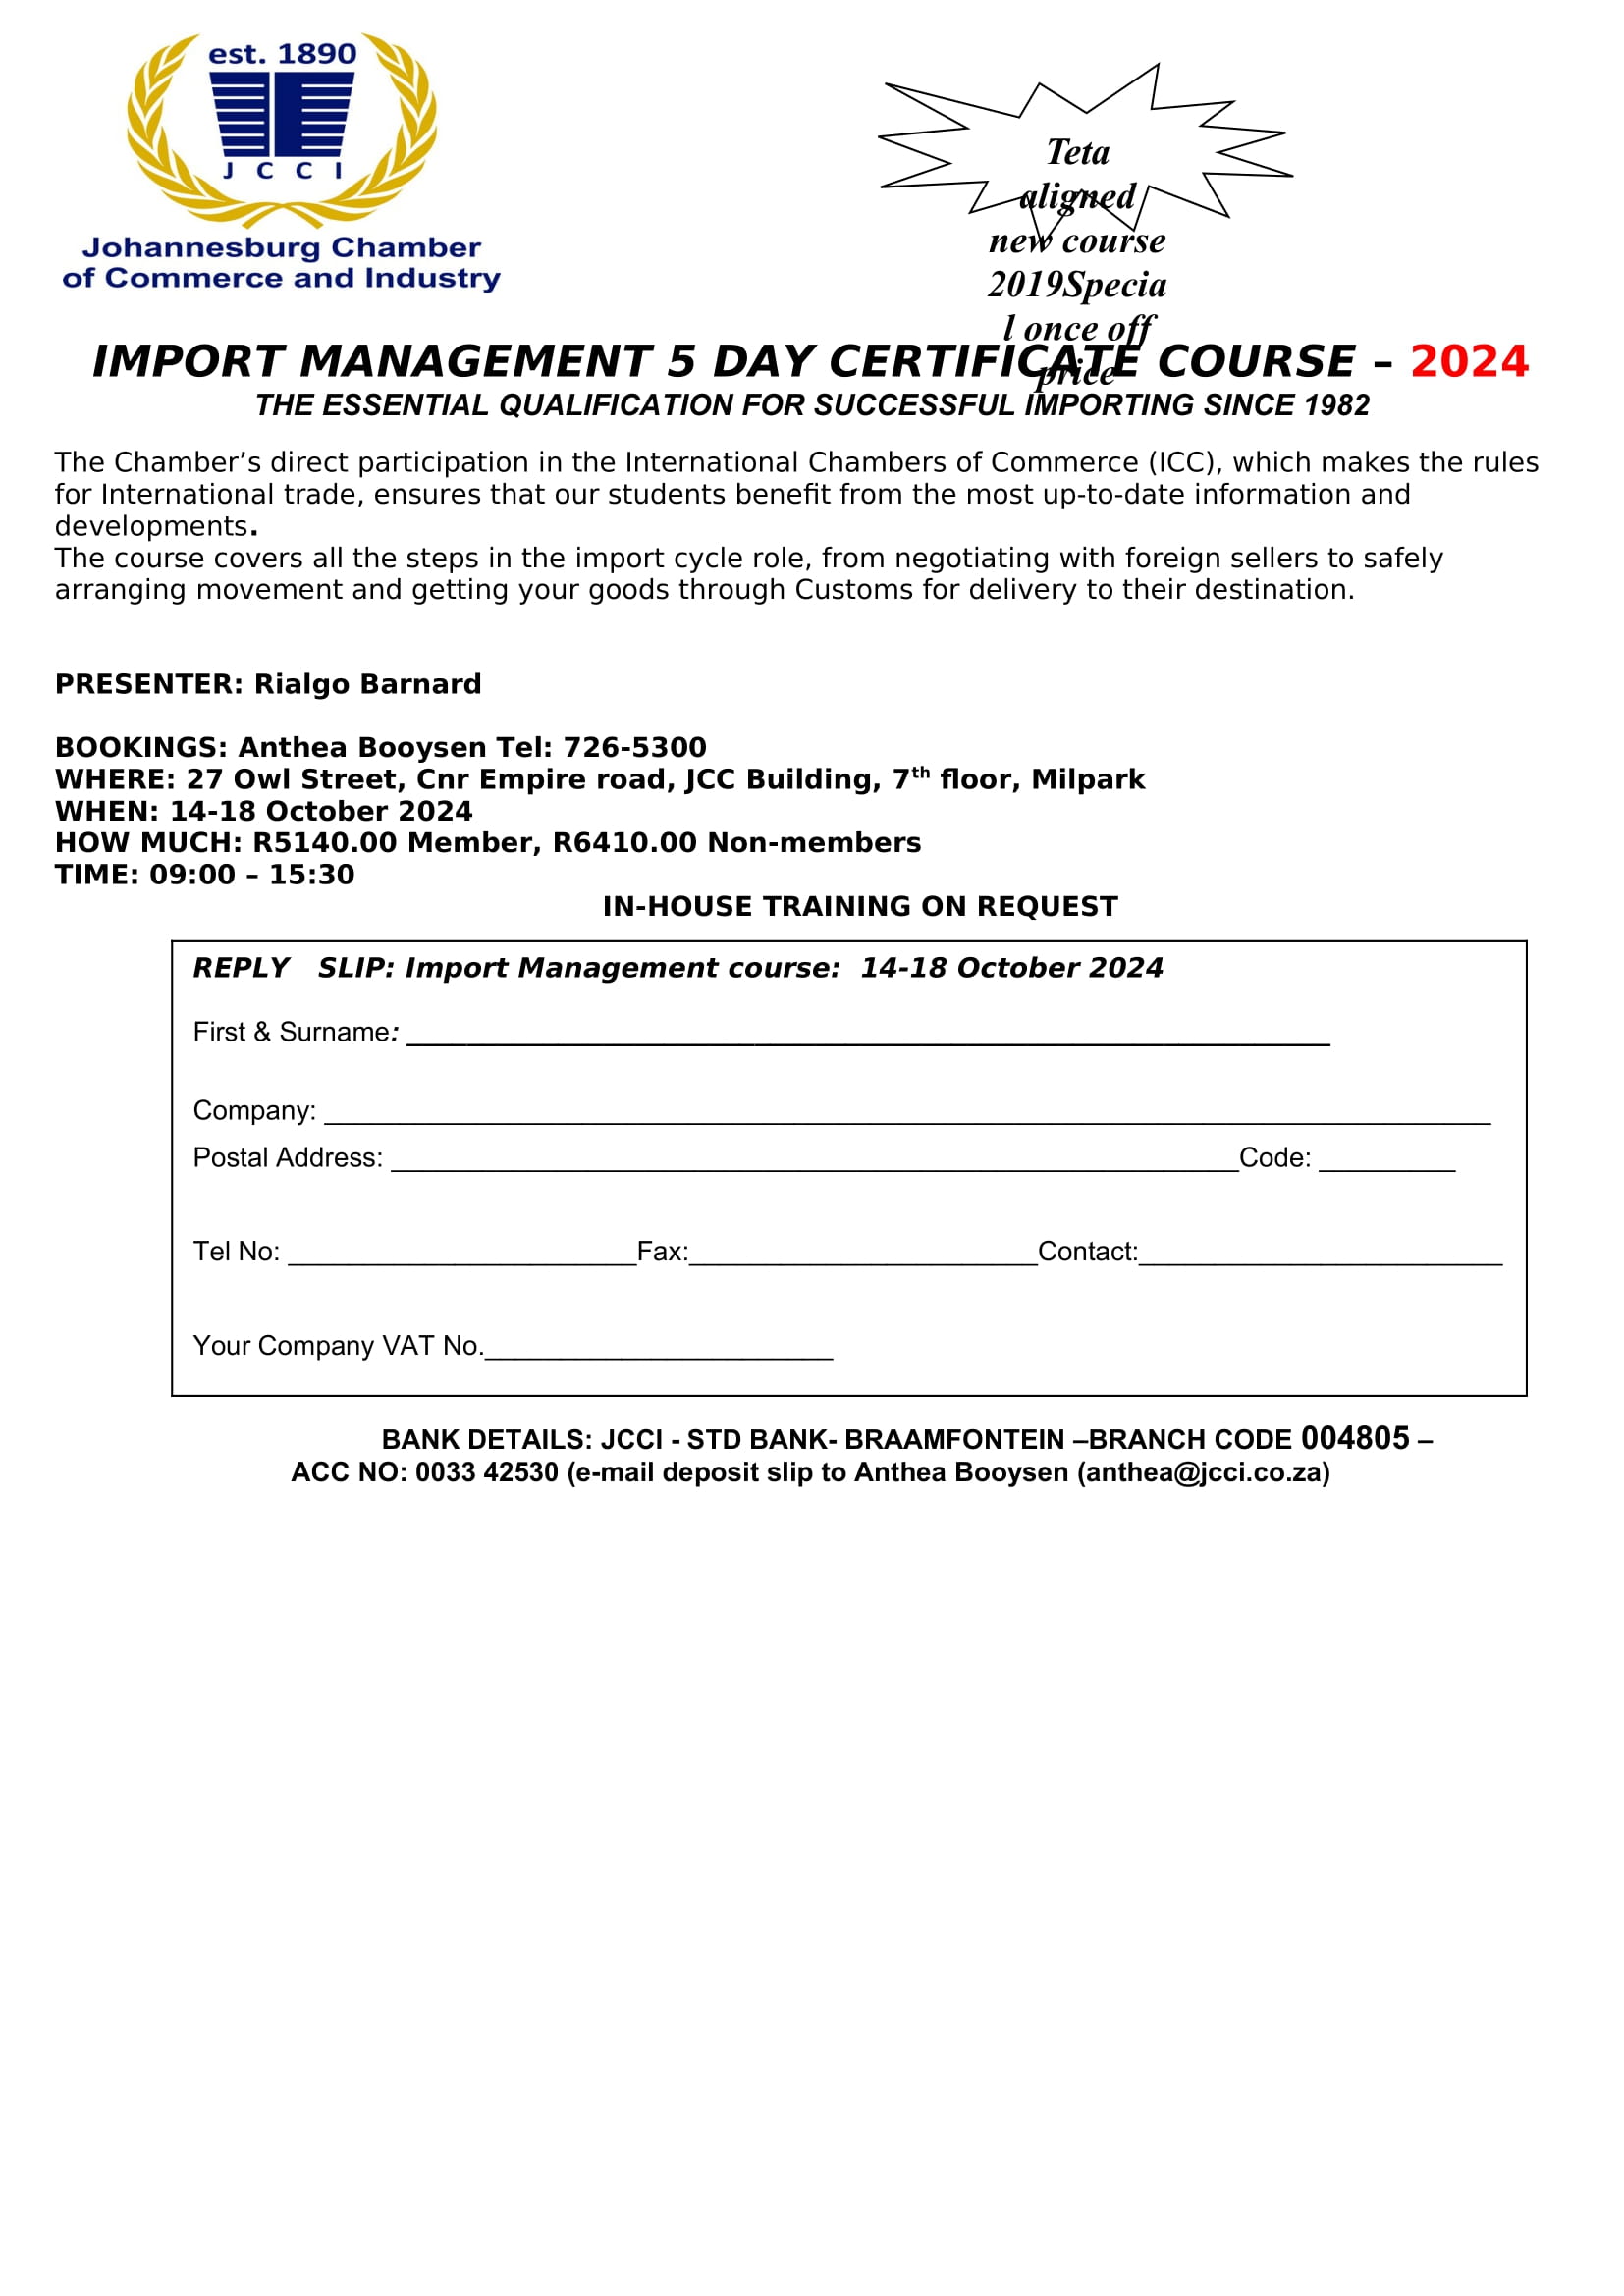 IMPORT MANAGEMENT 5 DAY CERTIFICATE COURSE – 14 - 18 OCTOBER2024